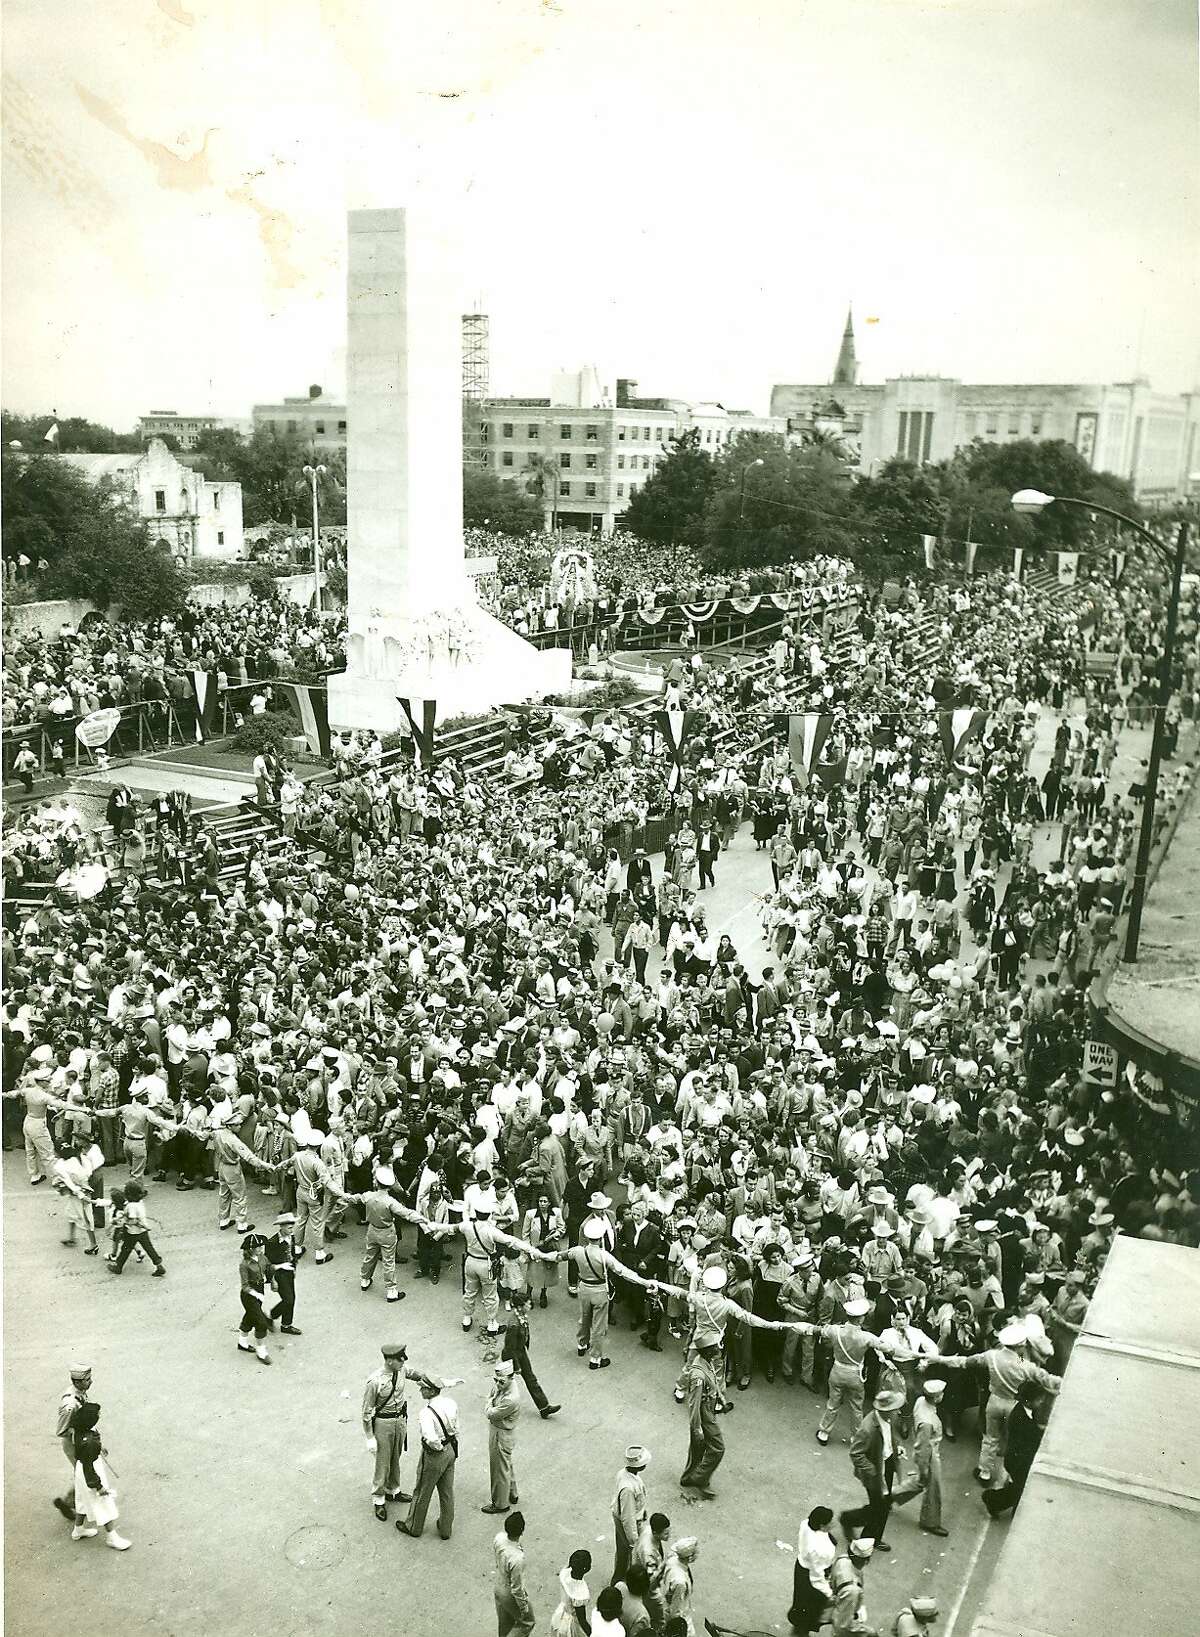 Fiesta 1950 - The parade is over and police engage in crowd control around the Alamo Cenotaph.